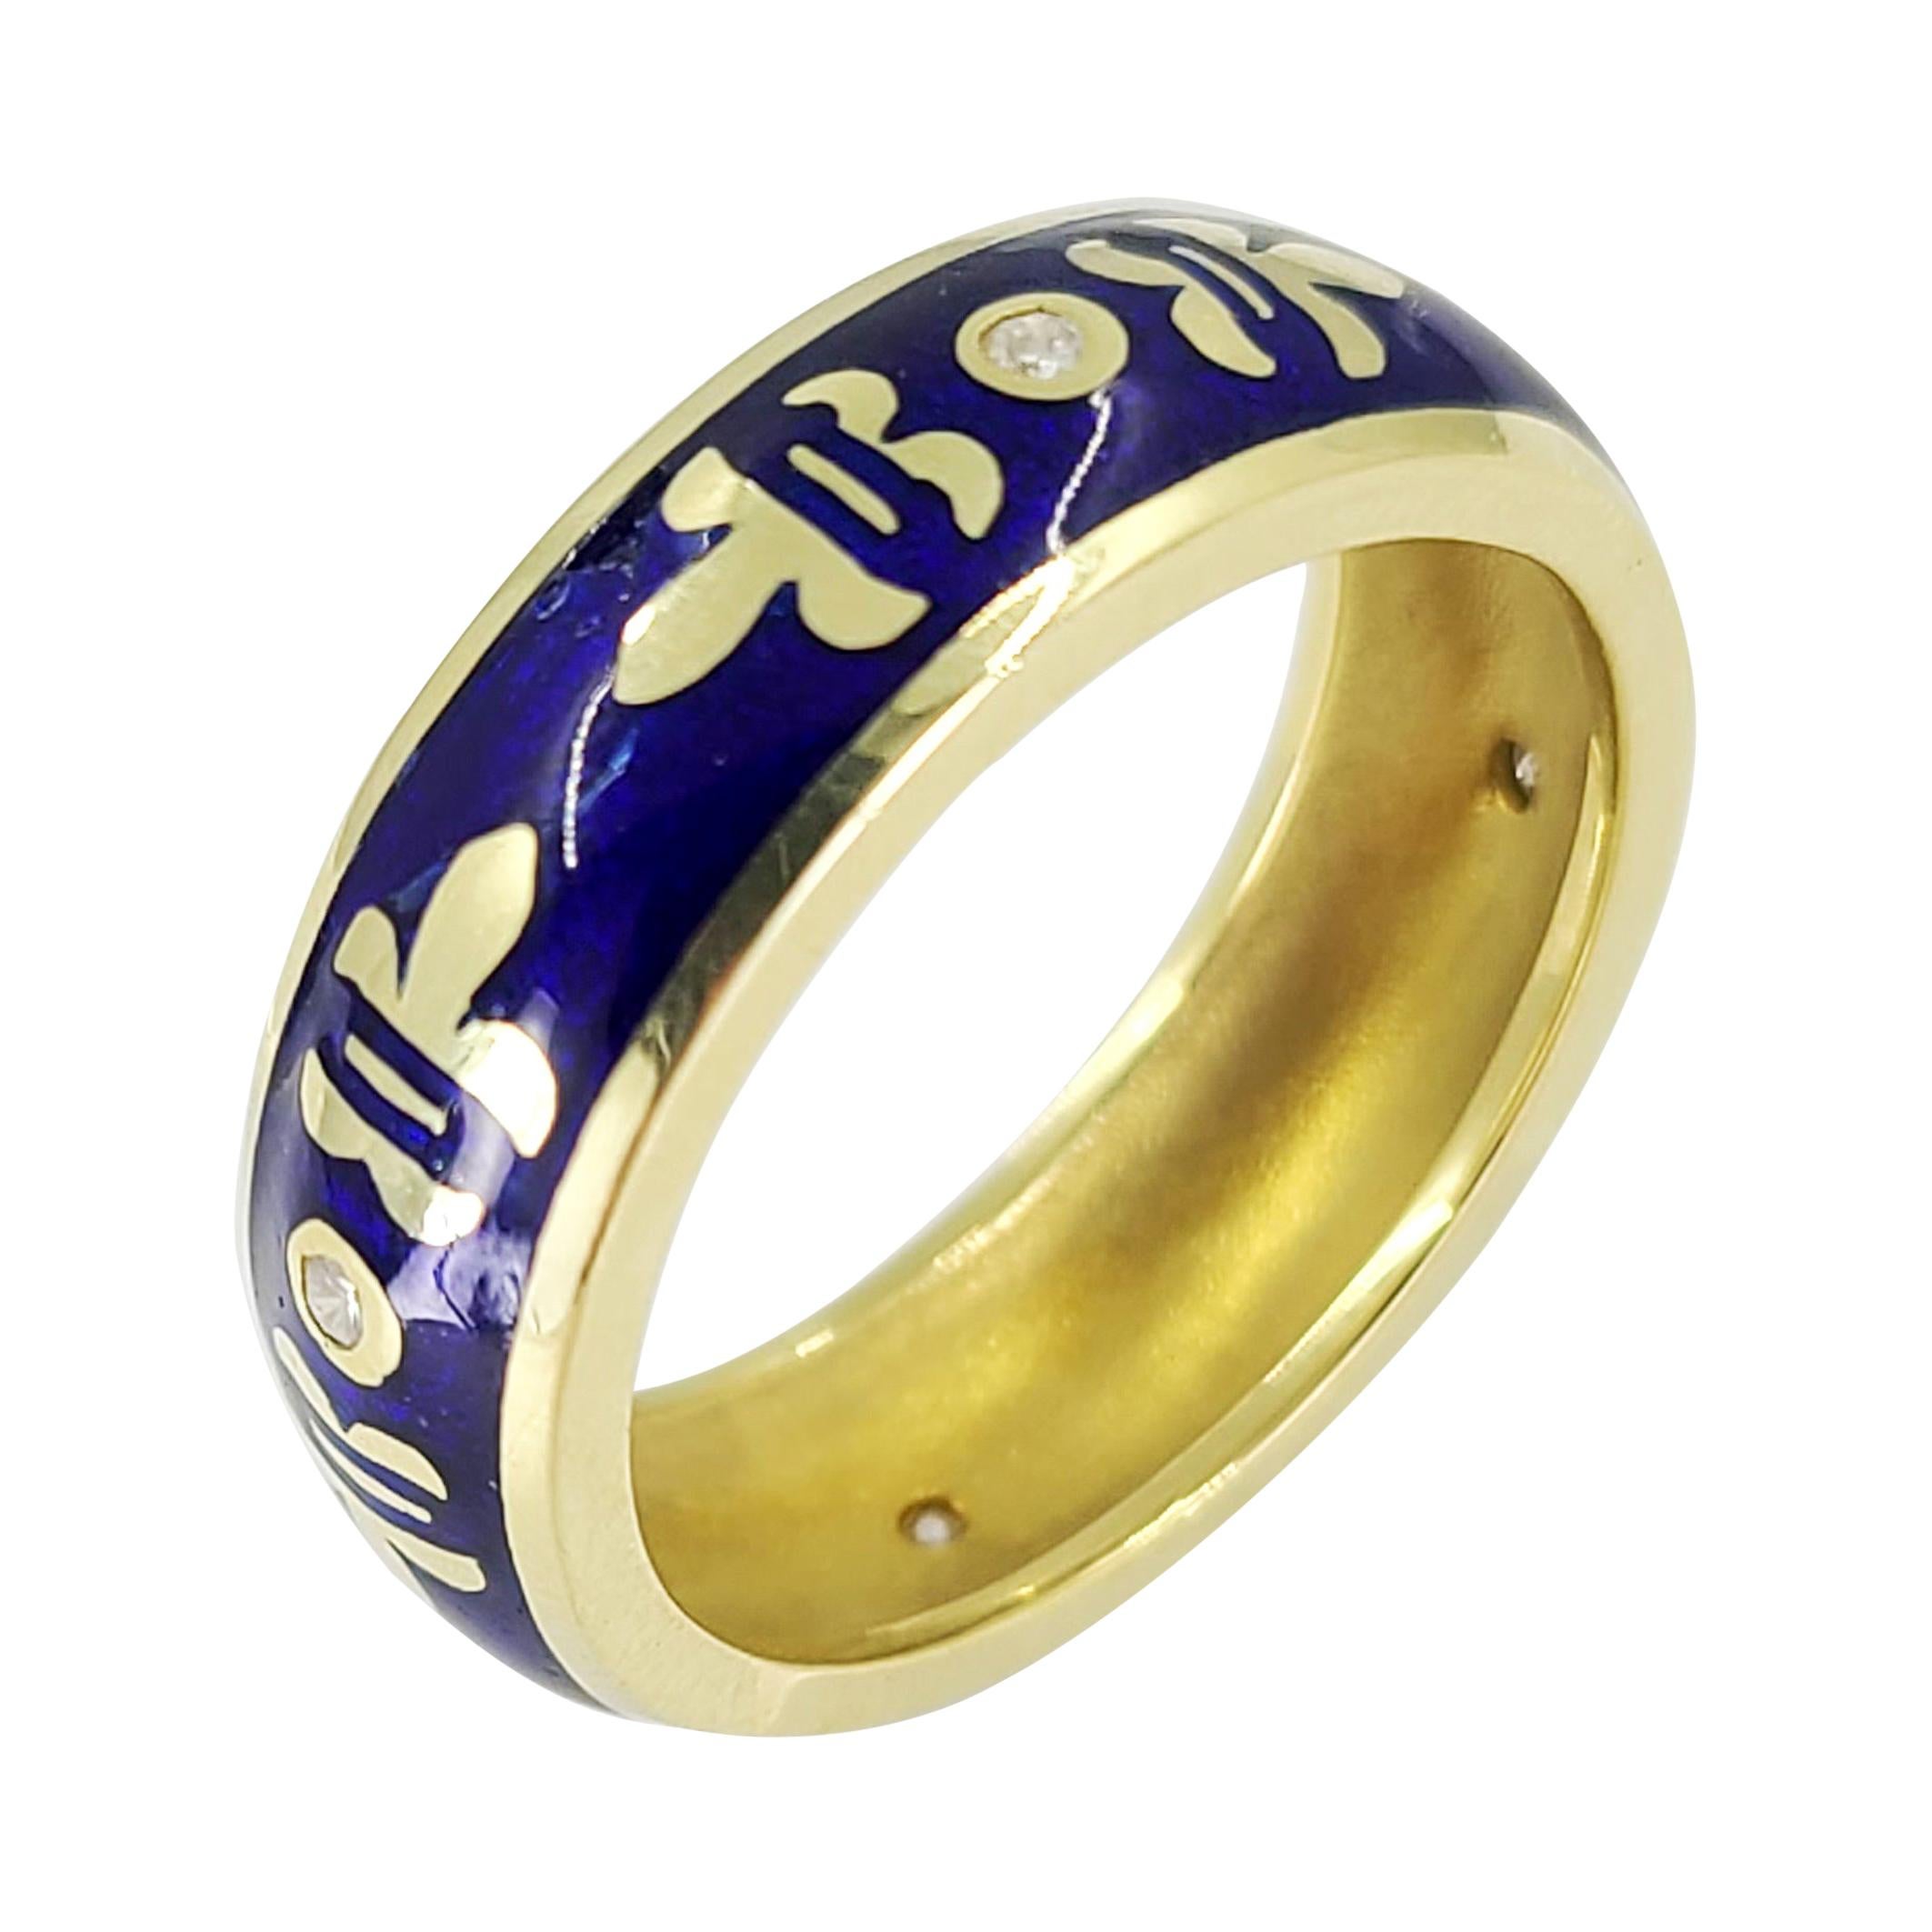 Susy Mor Yellow Gold & Blue Enamel Band